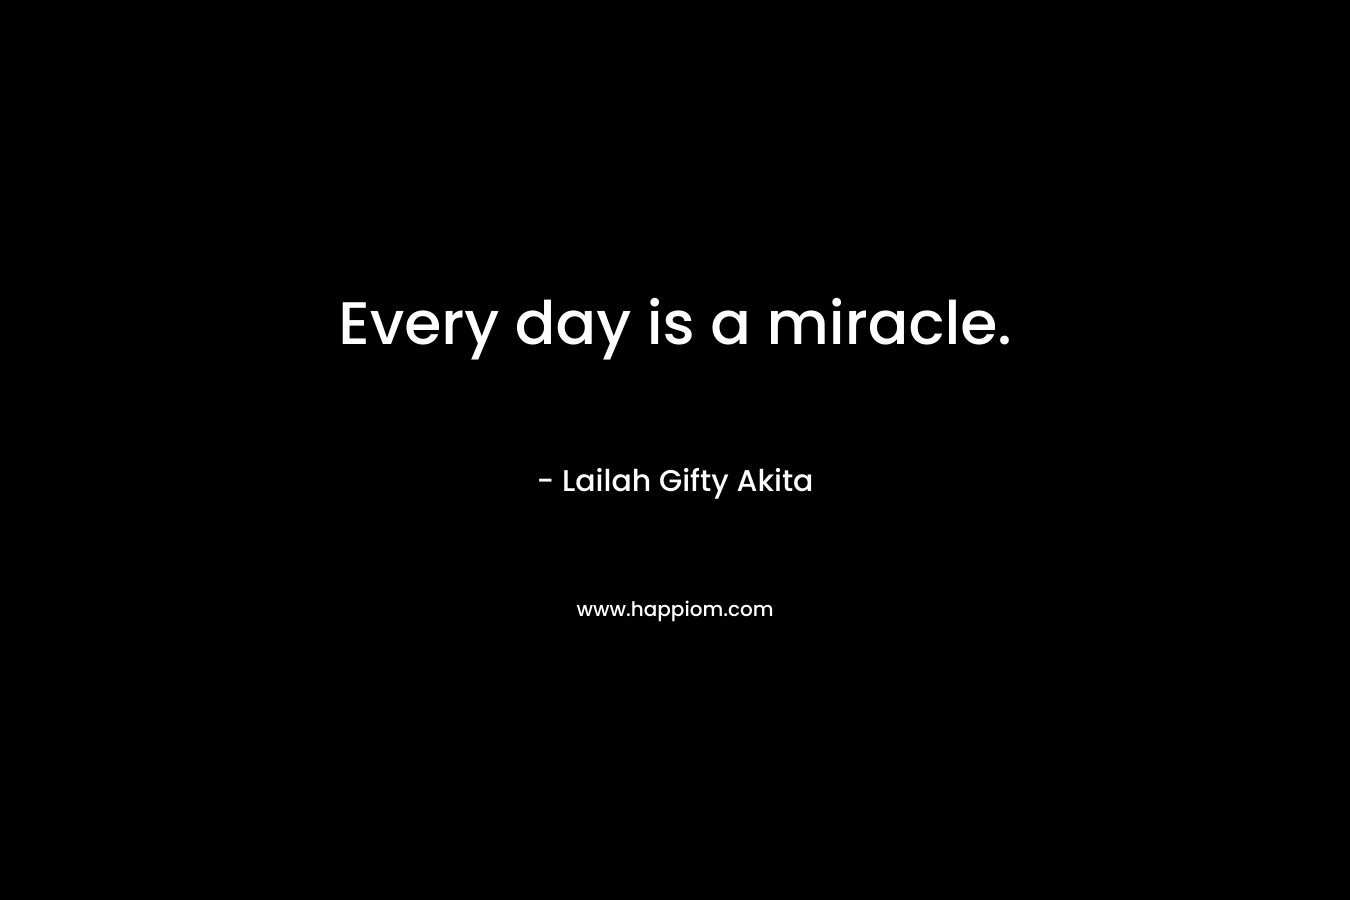 Every day is a miracle.